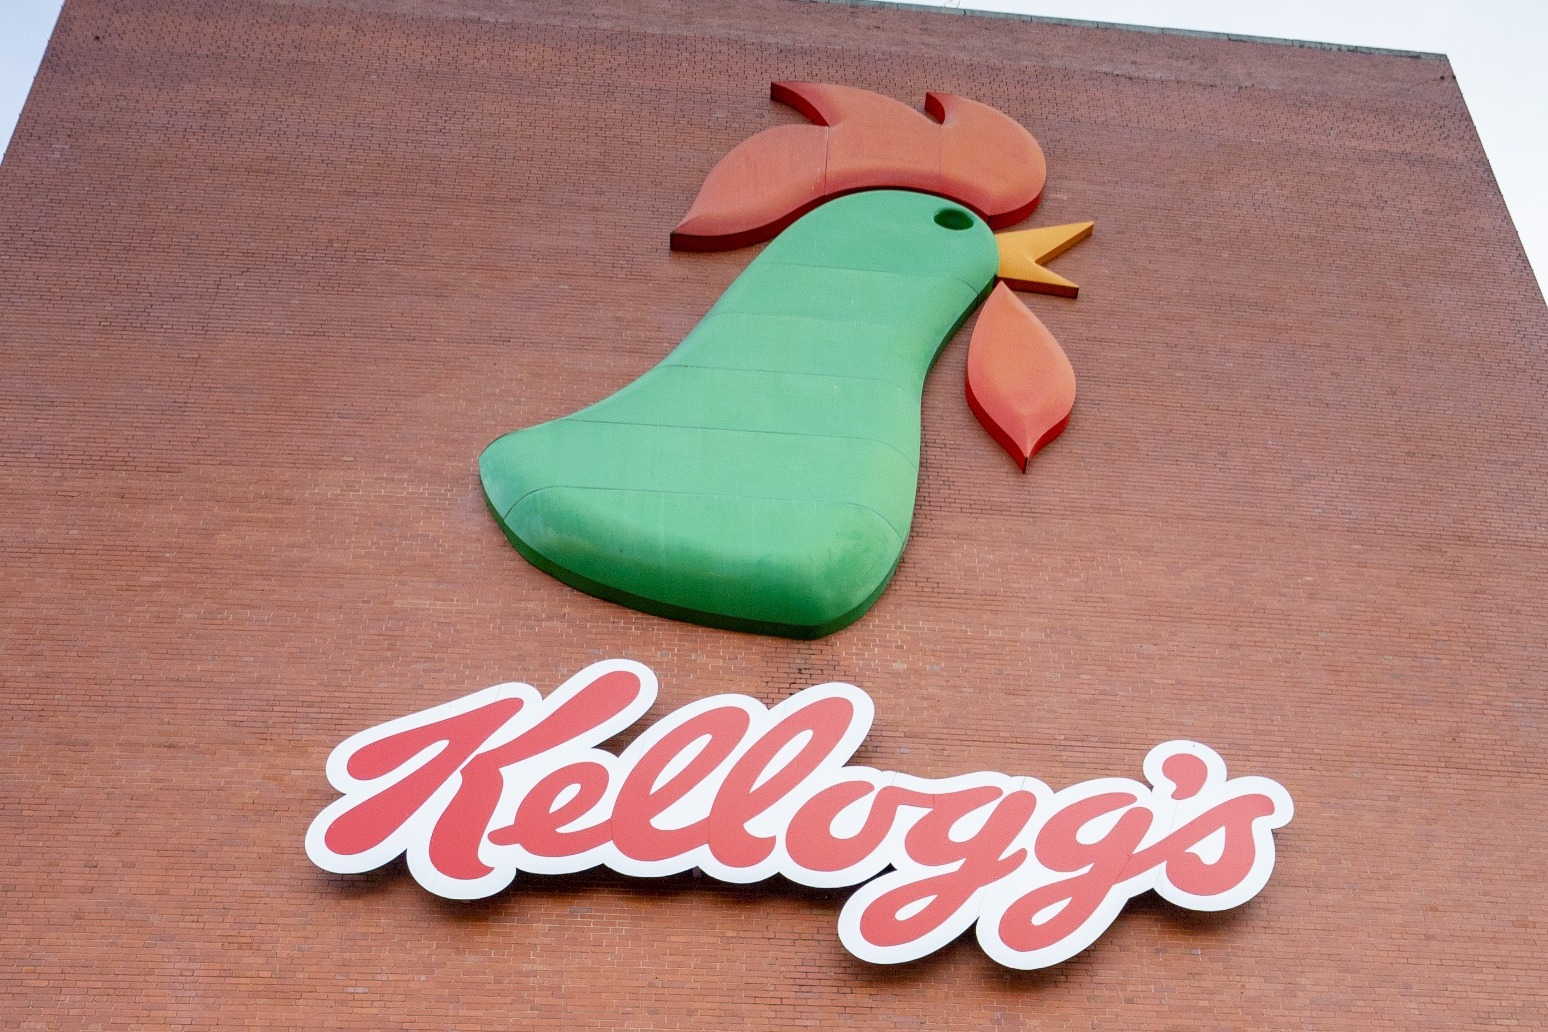 Kellogg’s trials Corn Flakes paper liner to make packaging fully recyclable 